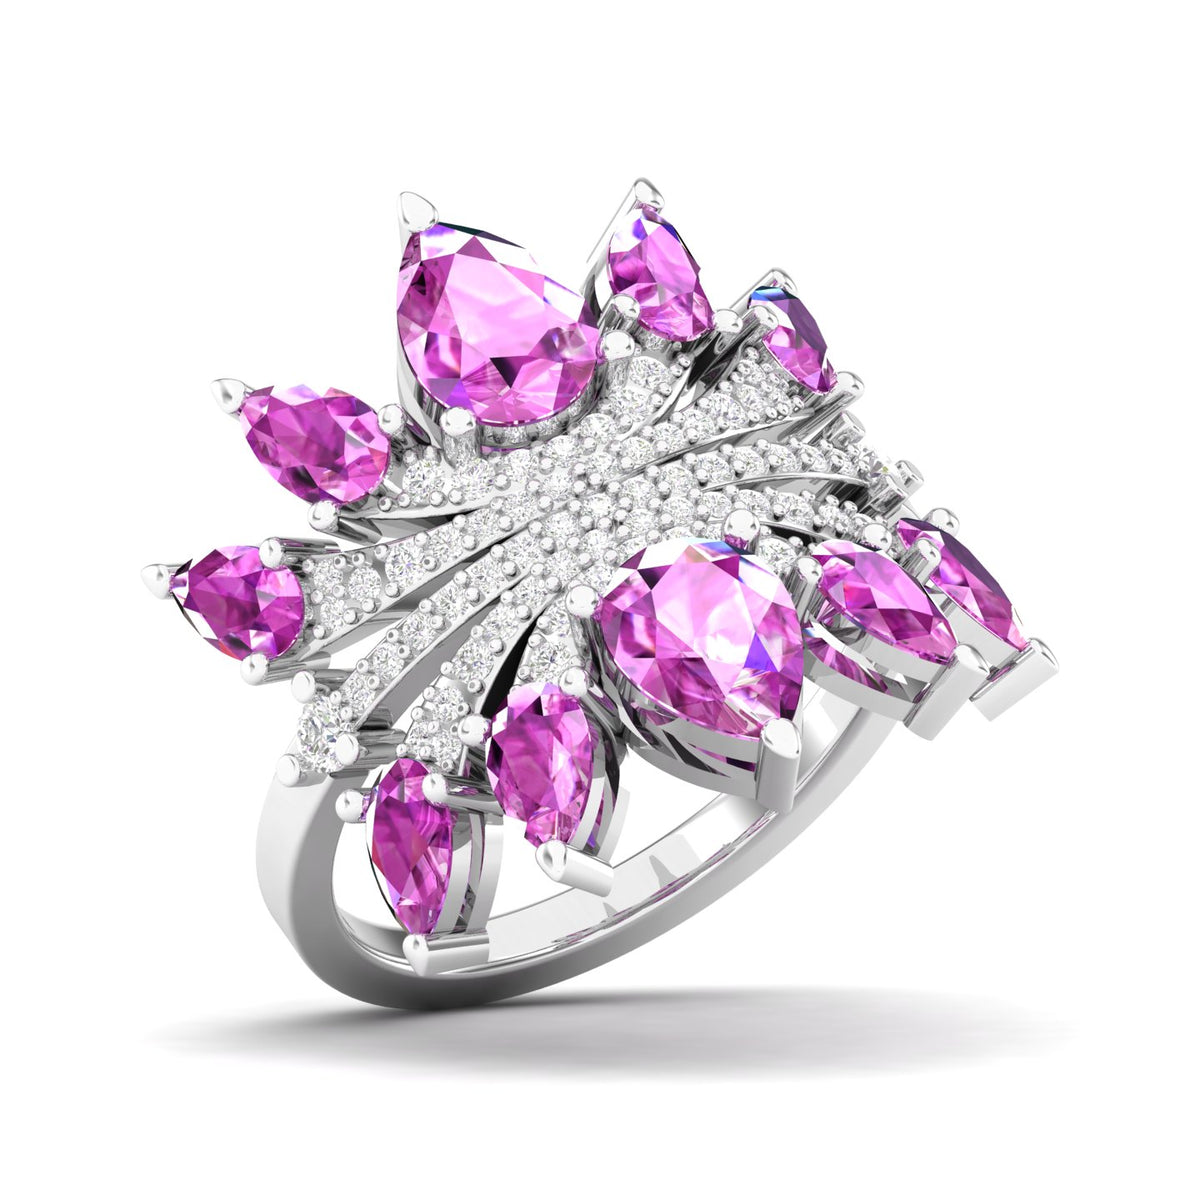 Maurya Graduated Pink Amethyst Lotus Cocktail Ring with Accent Diamonds